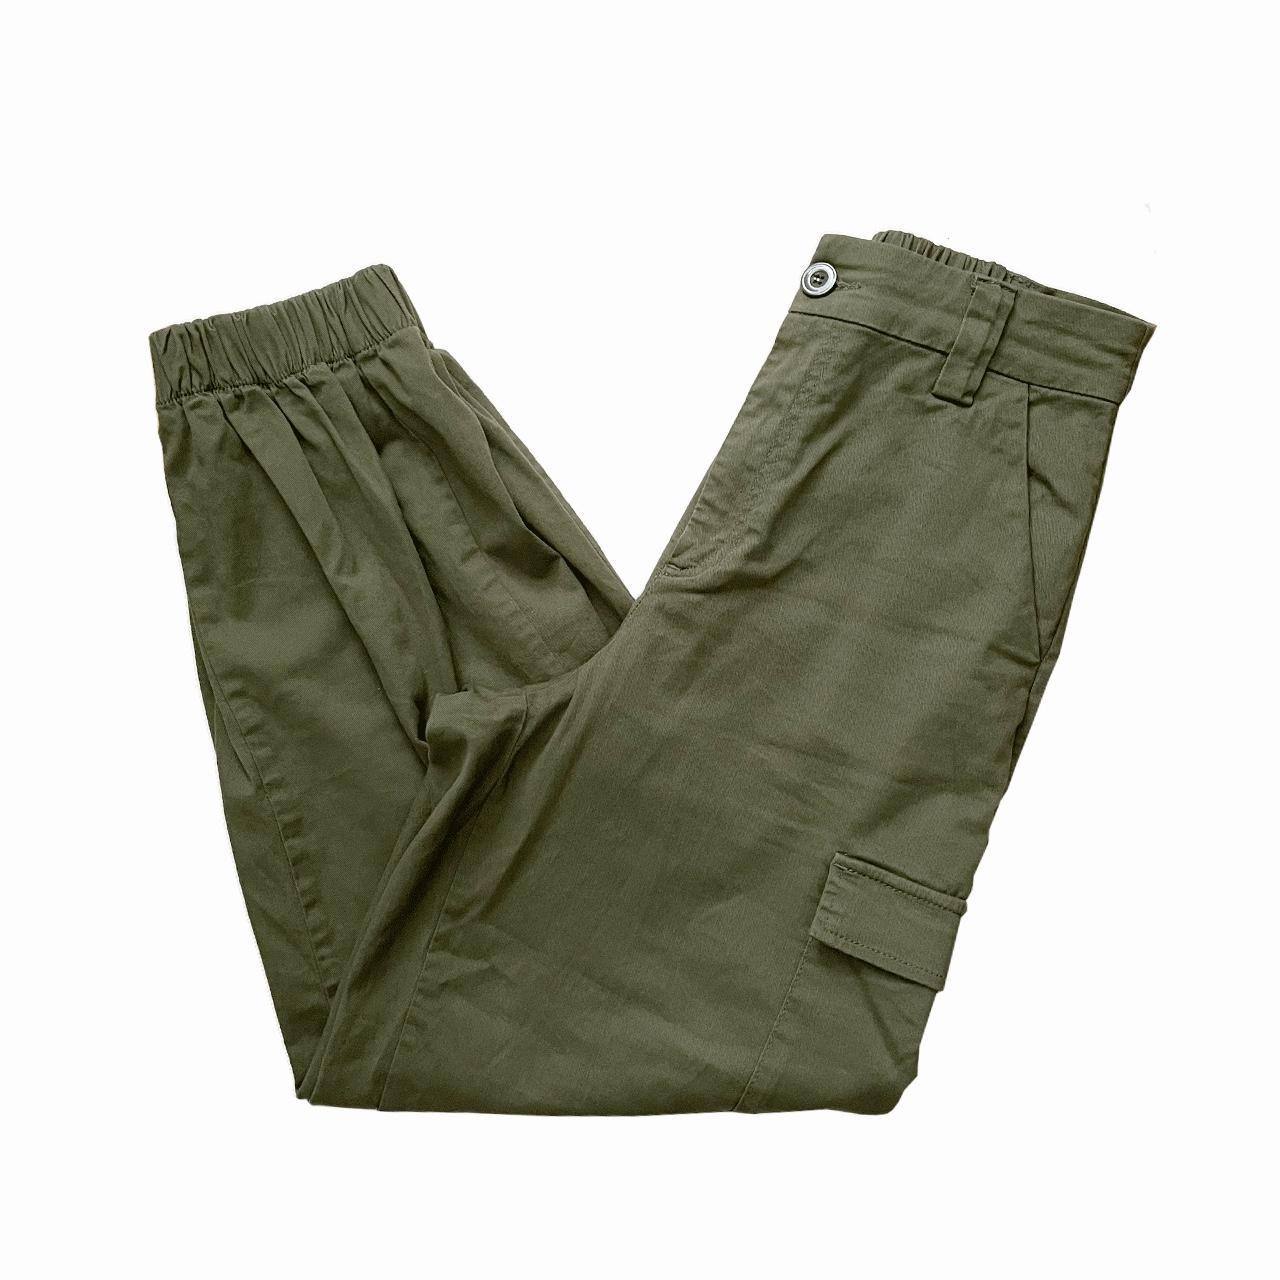 BDG Urban Outfitters Baggy Cargo Womens Pants - OLIVE